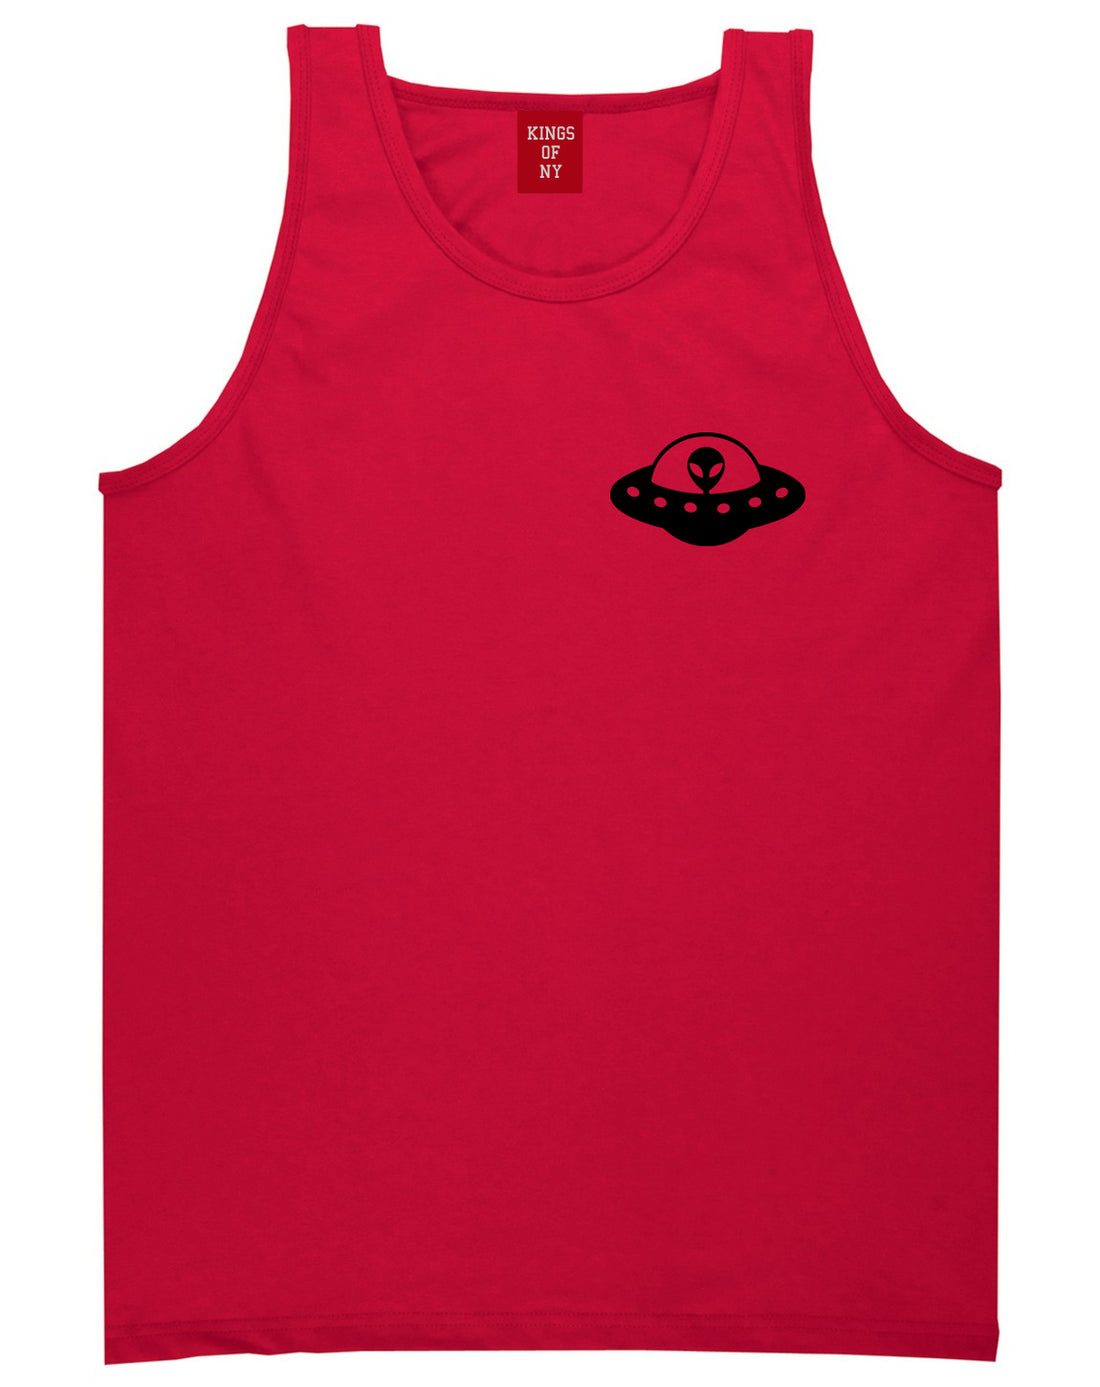 Alien_Spaceship_Chest Mens Red Tank Top Shirt by Kings Of NY